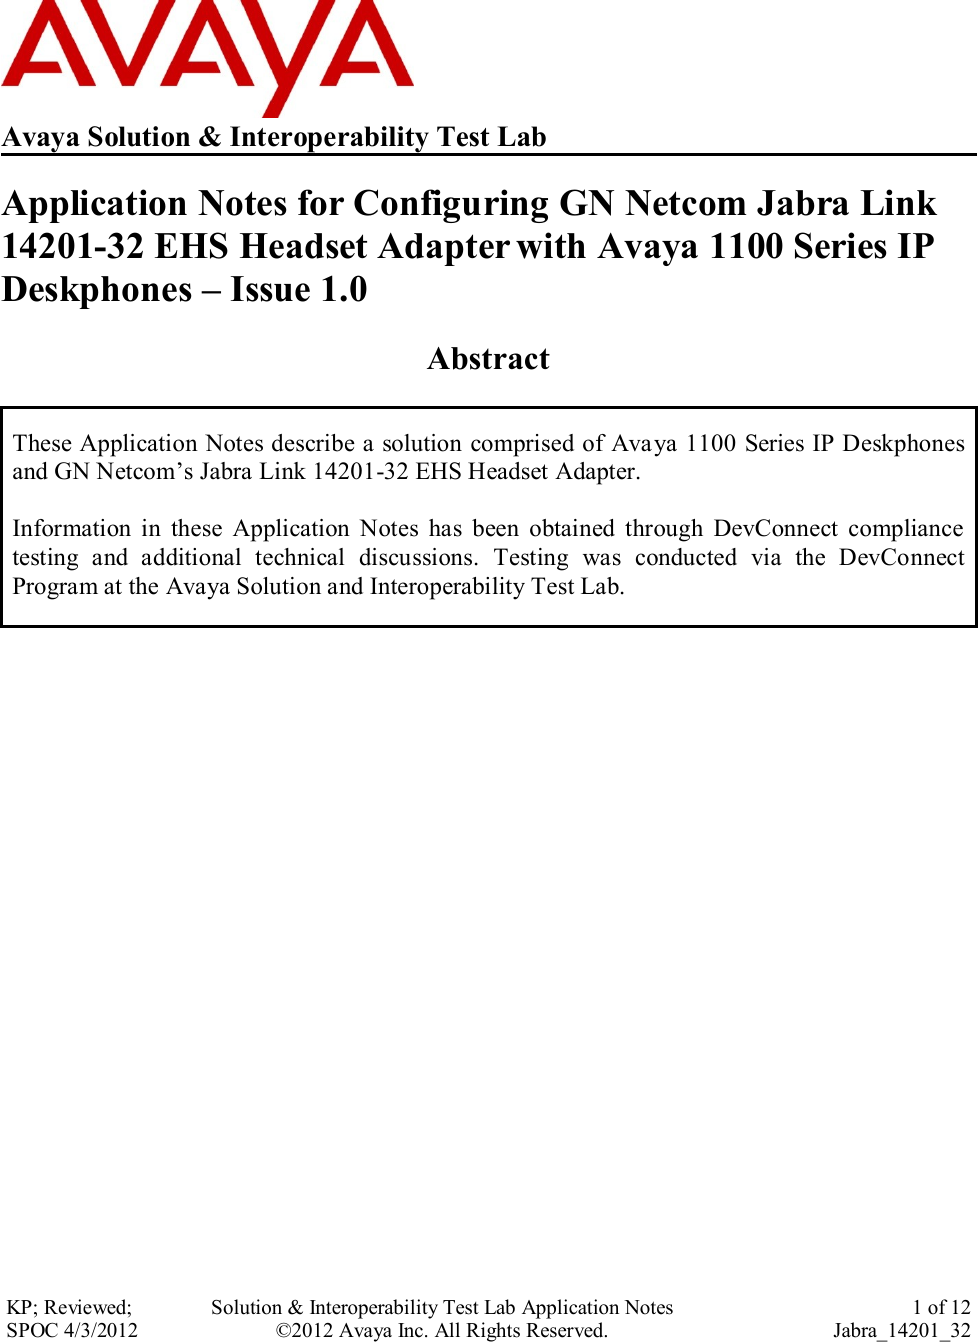 Page 1 of 12 - Avaya Avaya-1100-Series-Application-Note- Application Notes For Configuring GN Netcom Jabra Link 14201-32 EHS Headset Adapter With 1100 Series IP Deskphones  Avaya-1100-series-application-note